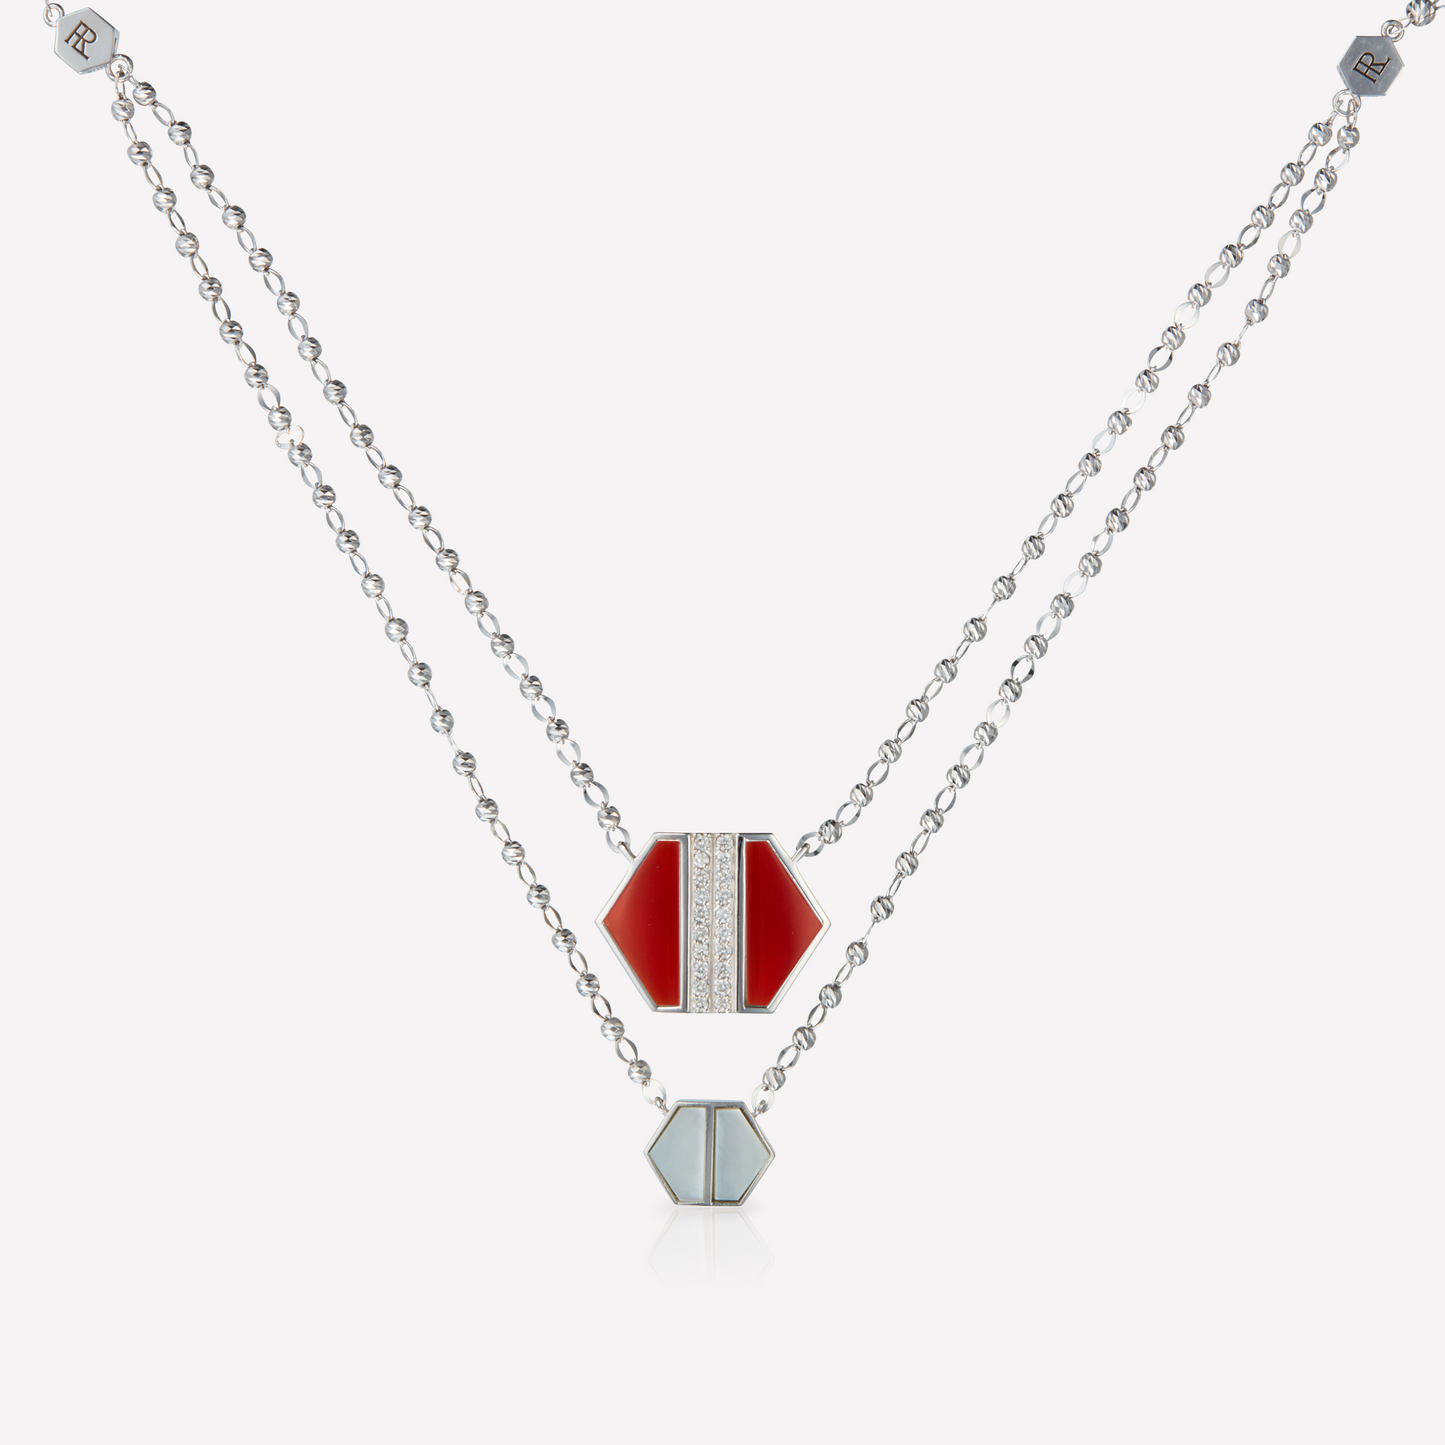 VOID Filled By You Necklace, Large, Carnelian, Diamond L